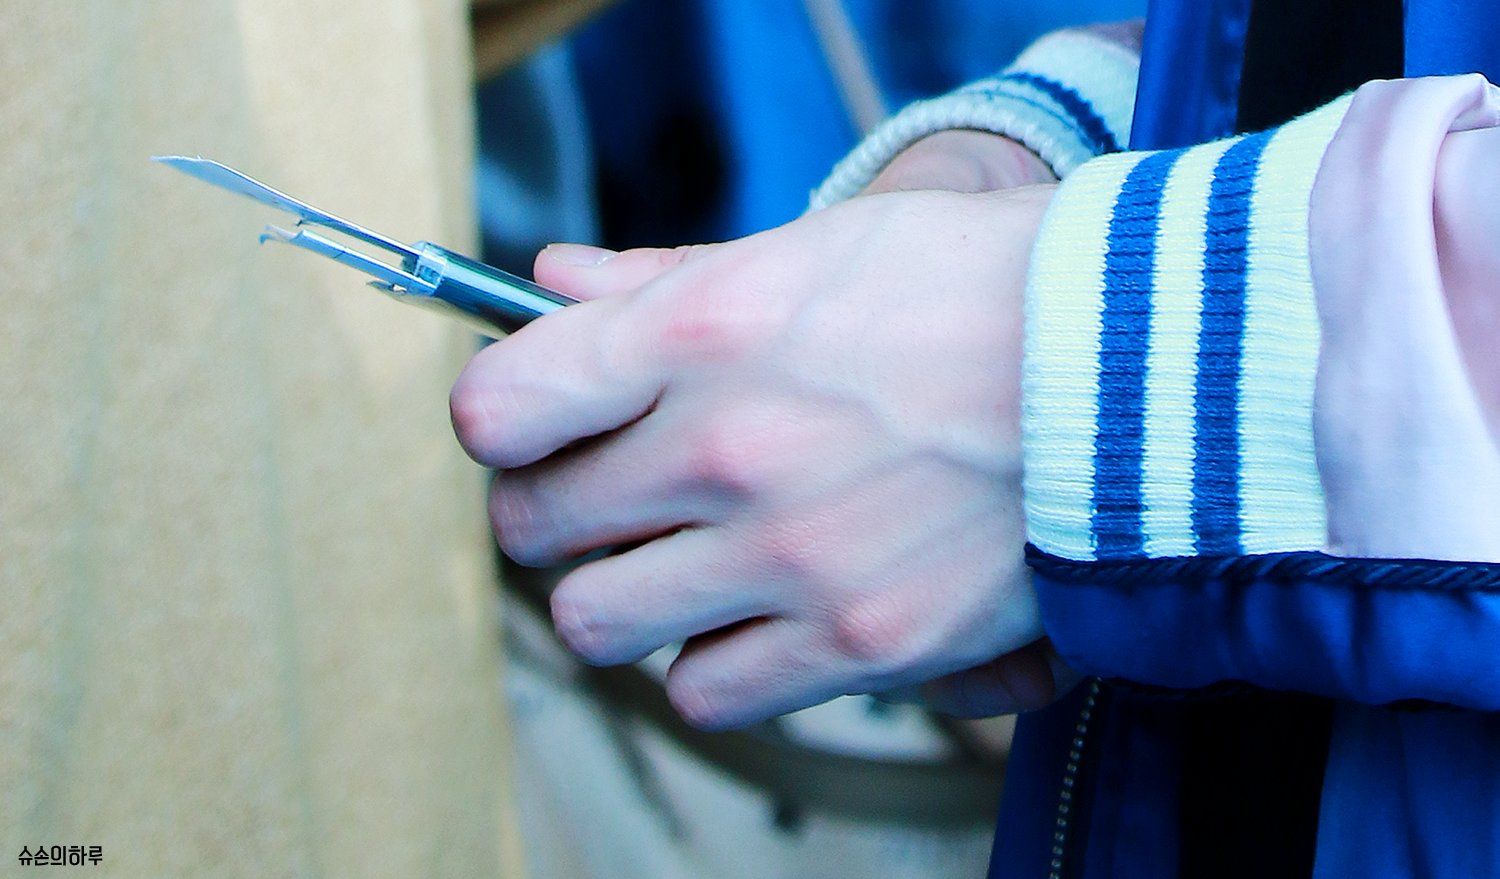 29 Photos Of BTS Suga’s Hands You Really Just Need To See - Koreaboo